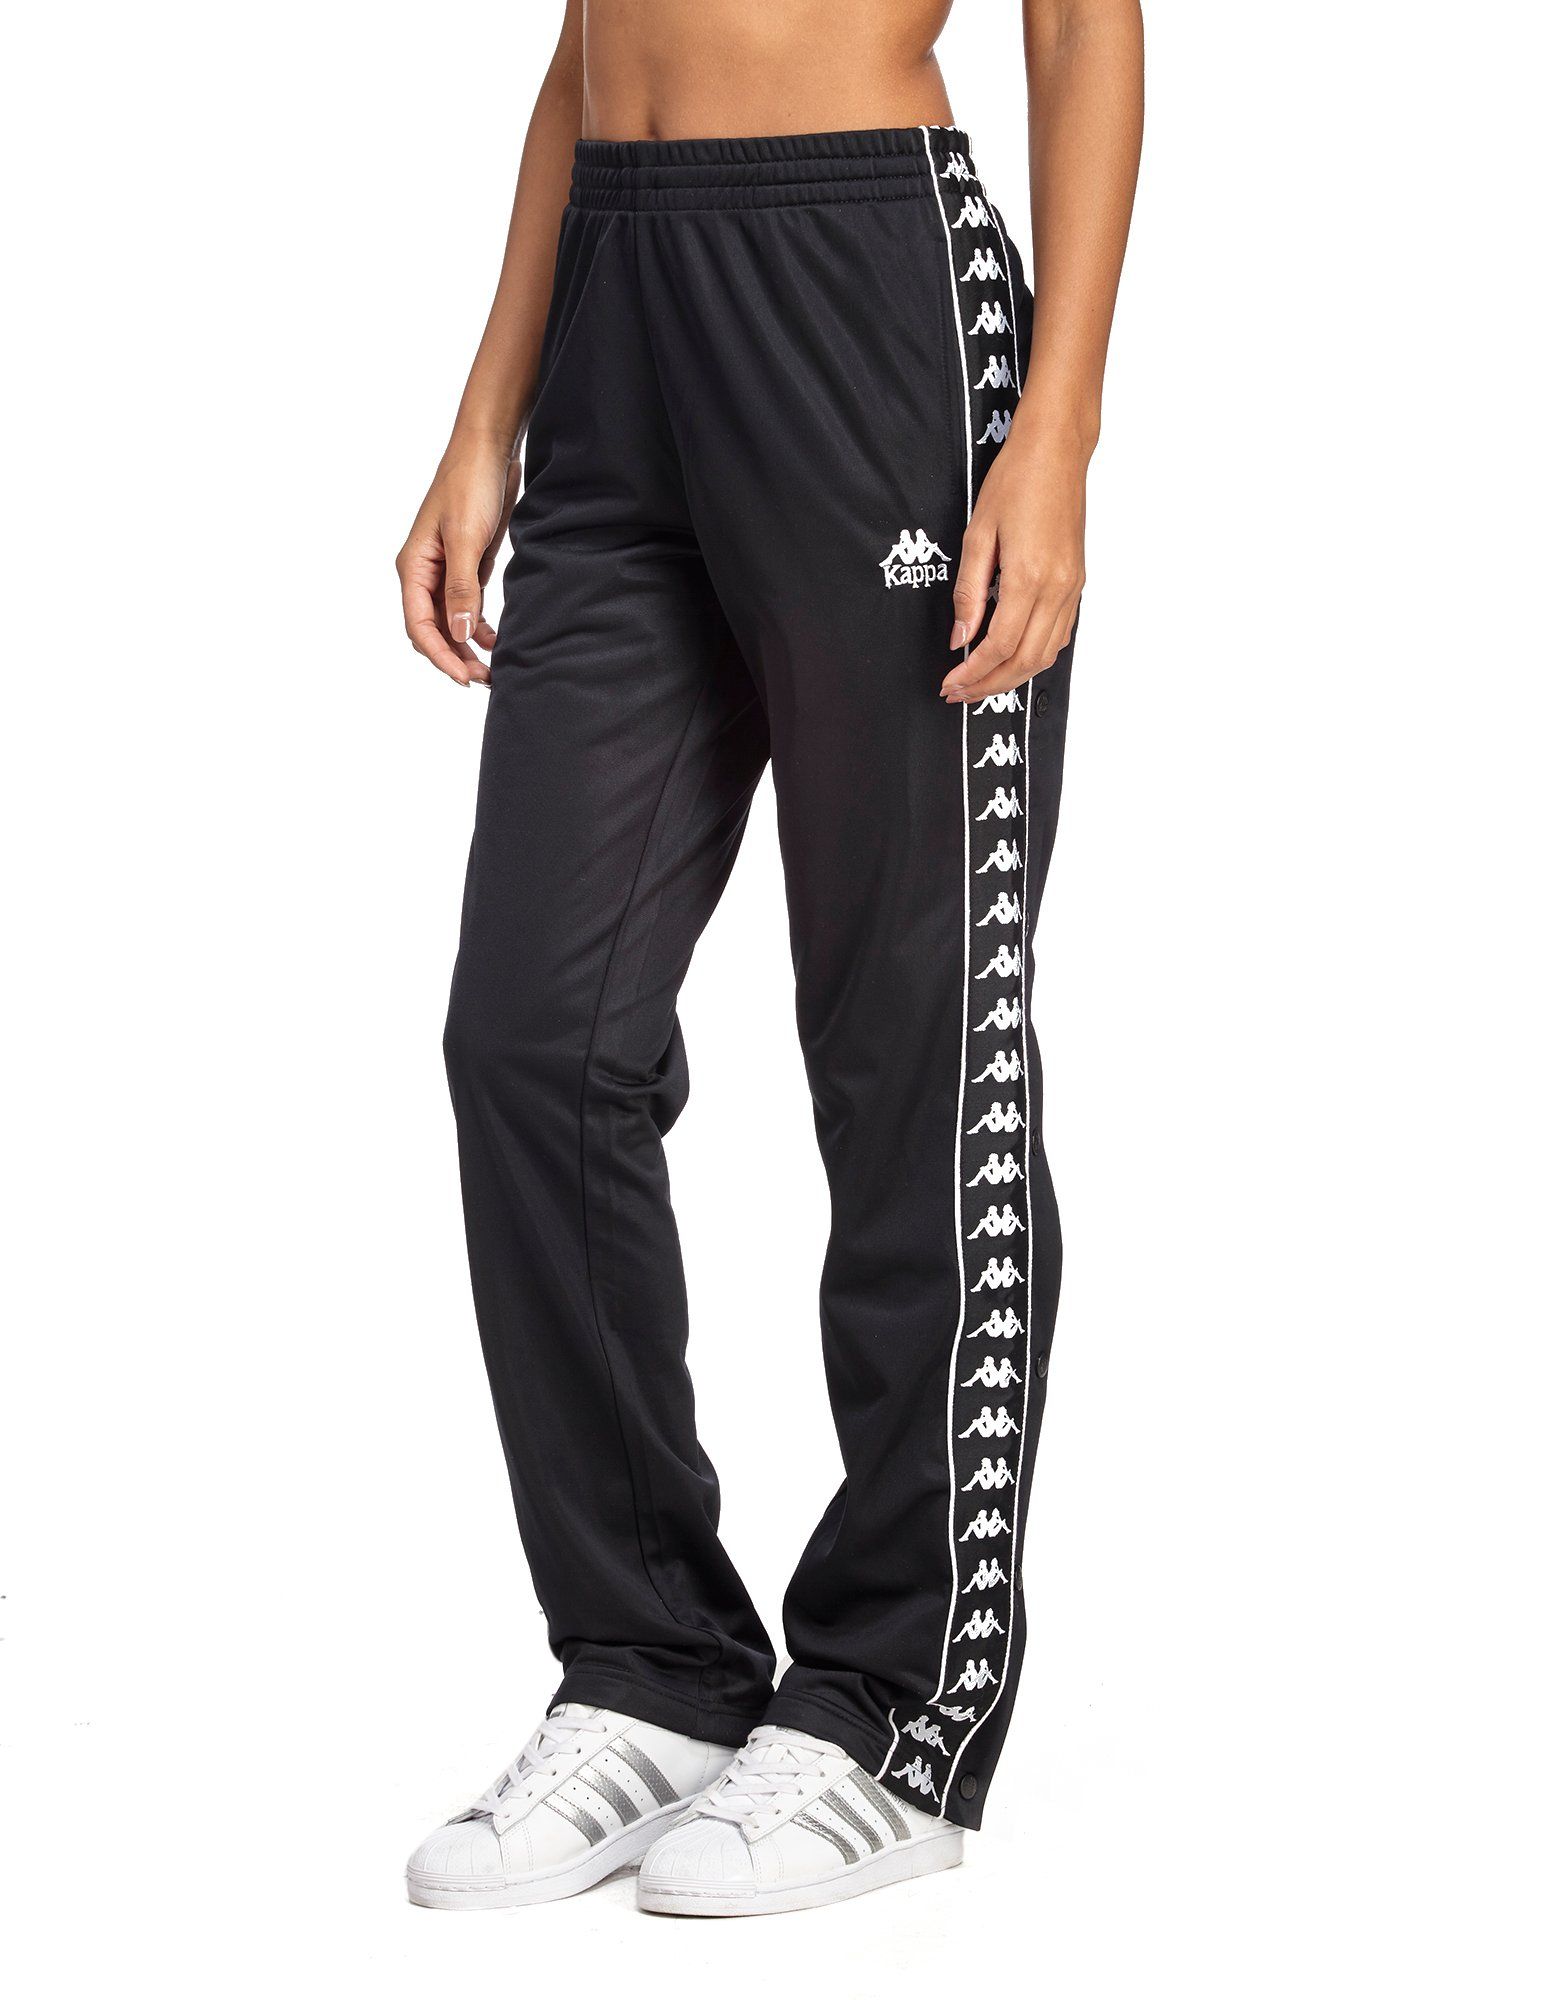 adidas popper trousers uk | What Makes Adidas Popper Trousers Uk So ...